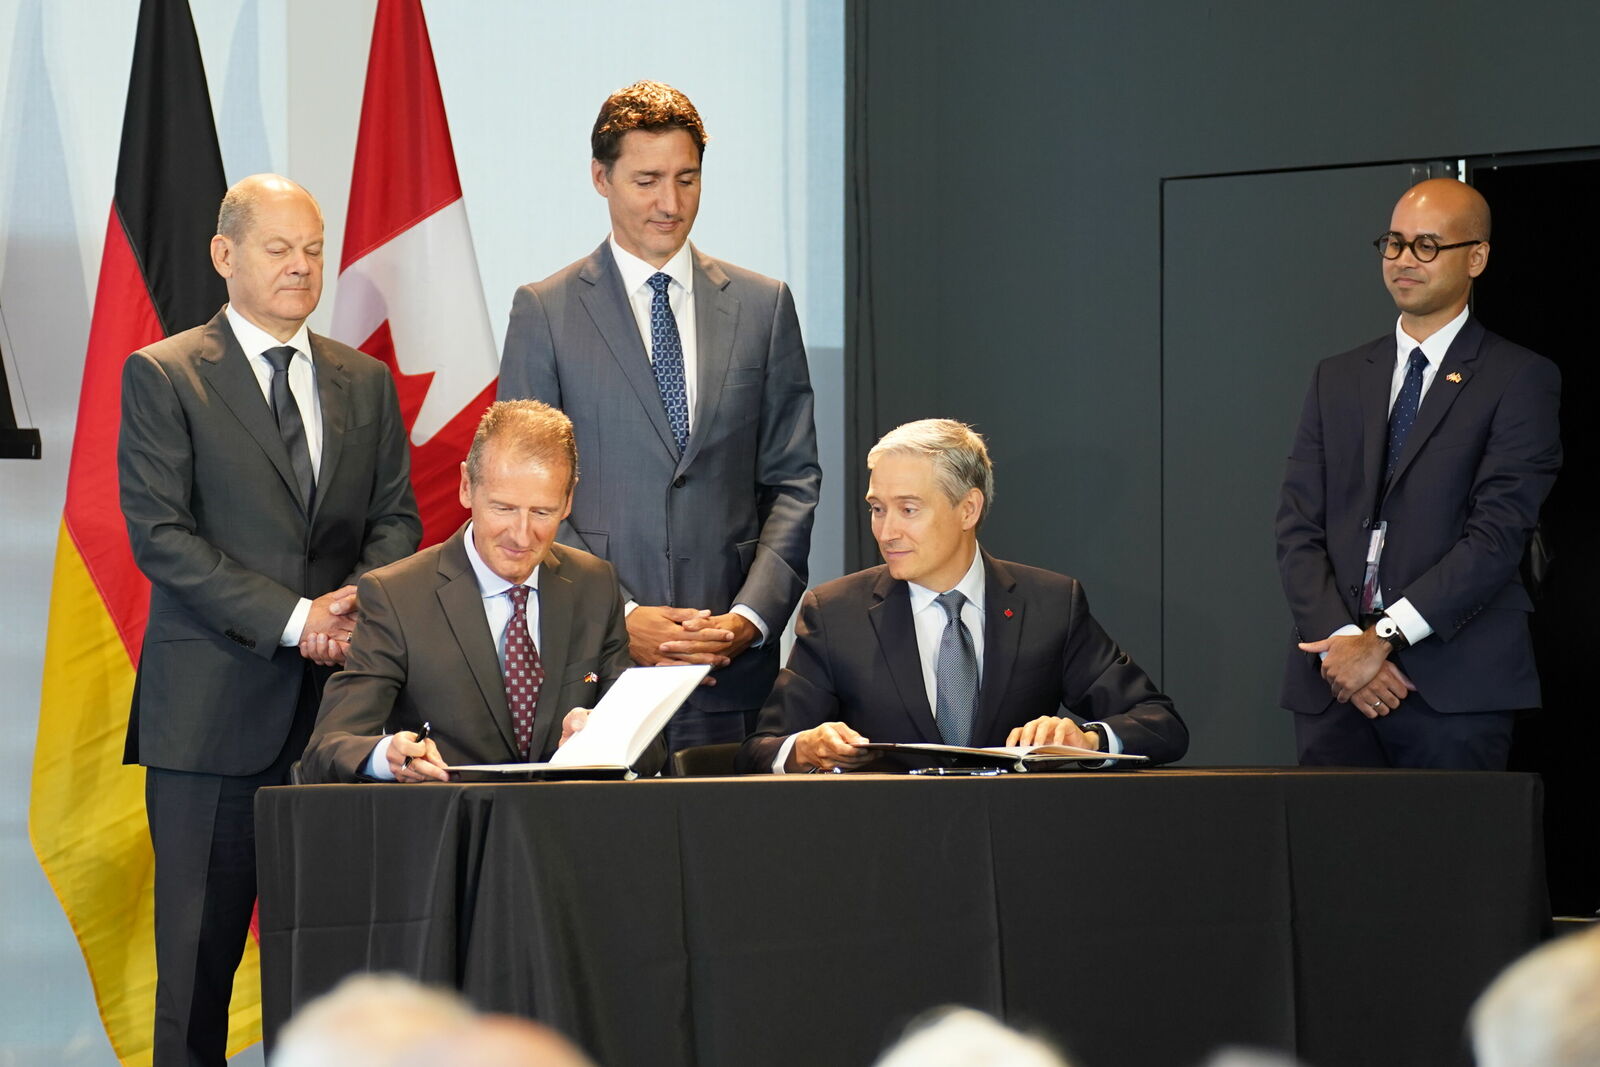 Volkswagen Group and Canada aim to advance sustainable battery supply chain in North America